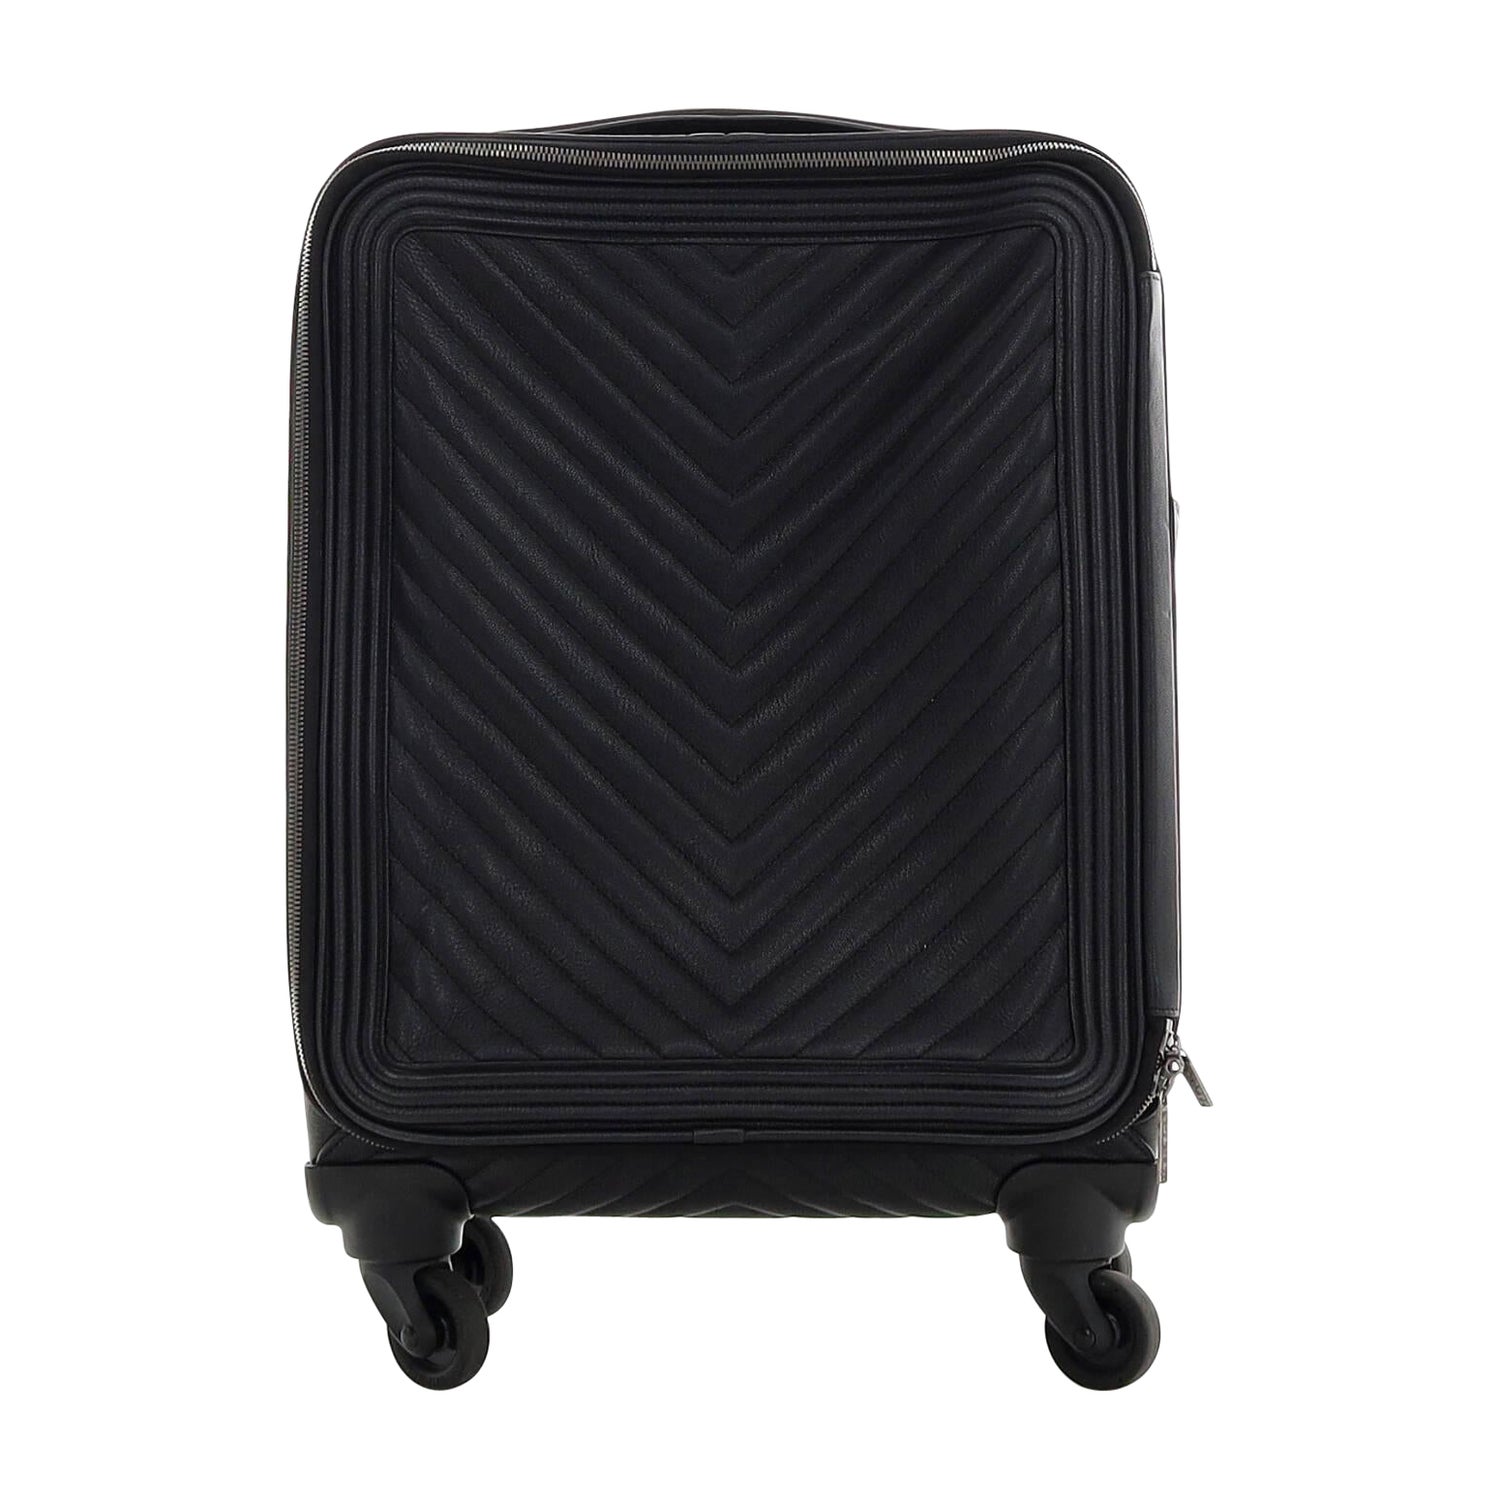 Sold at Auction: Chanel - 'Coco Case' trolley bag in quilted metallic  caviar leather, from the S/S 2016 'Airlines' collection, rectangular body  with all-around zip closure, featuring a telescoping handle, four rolling